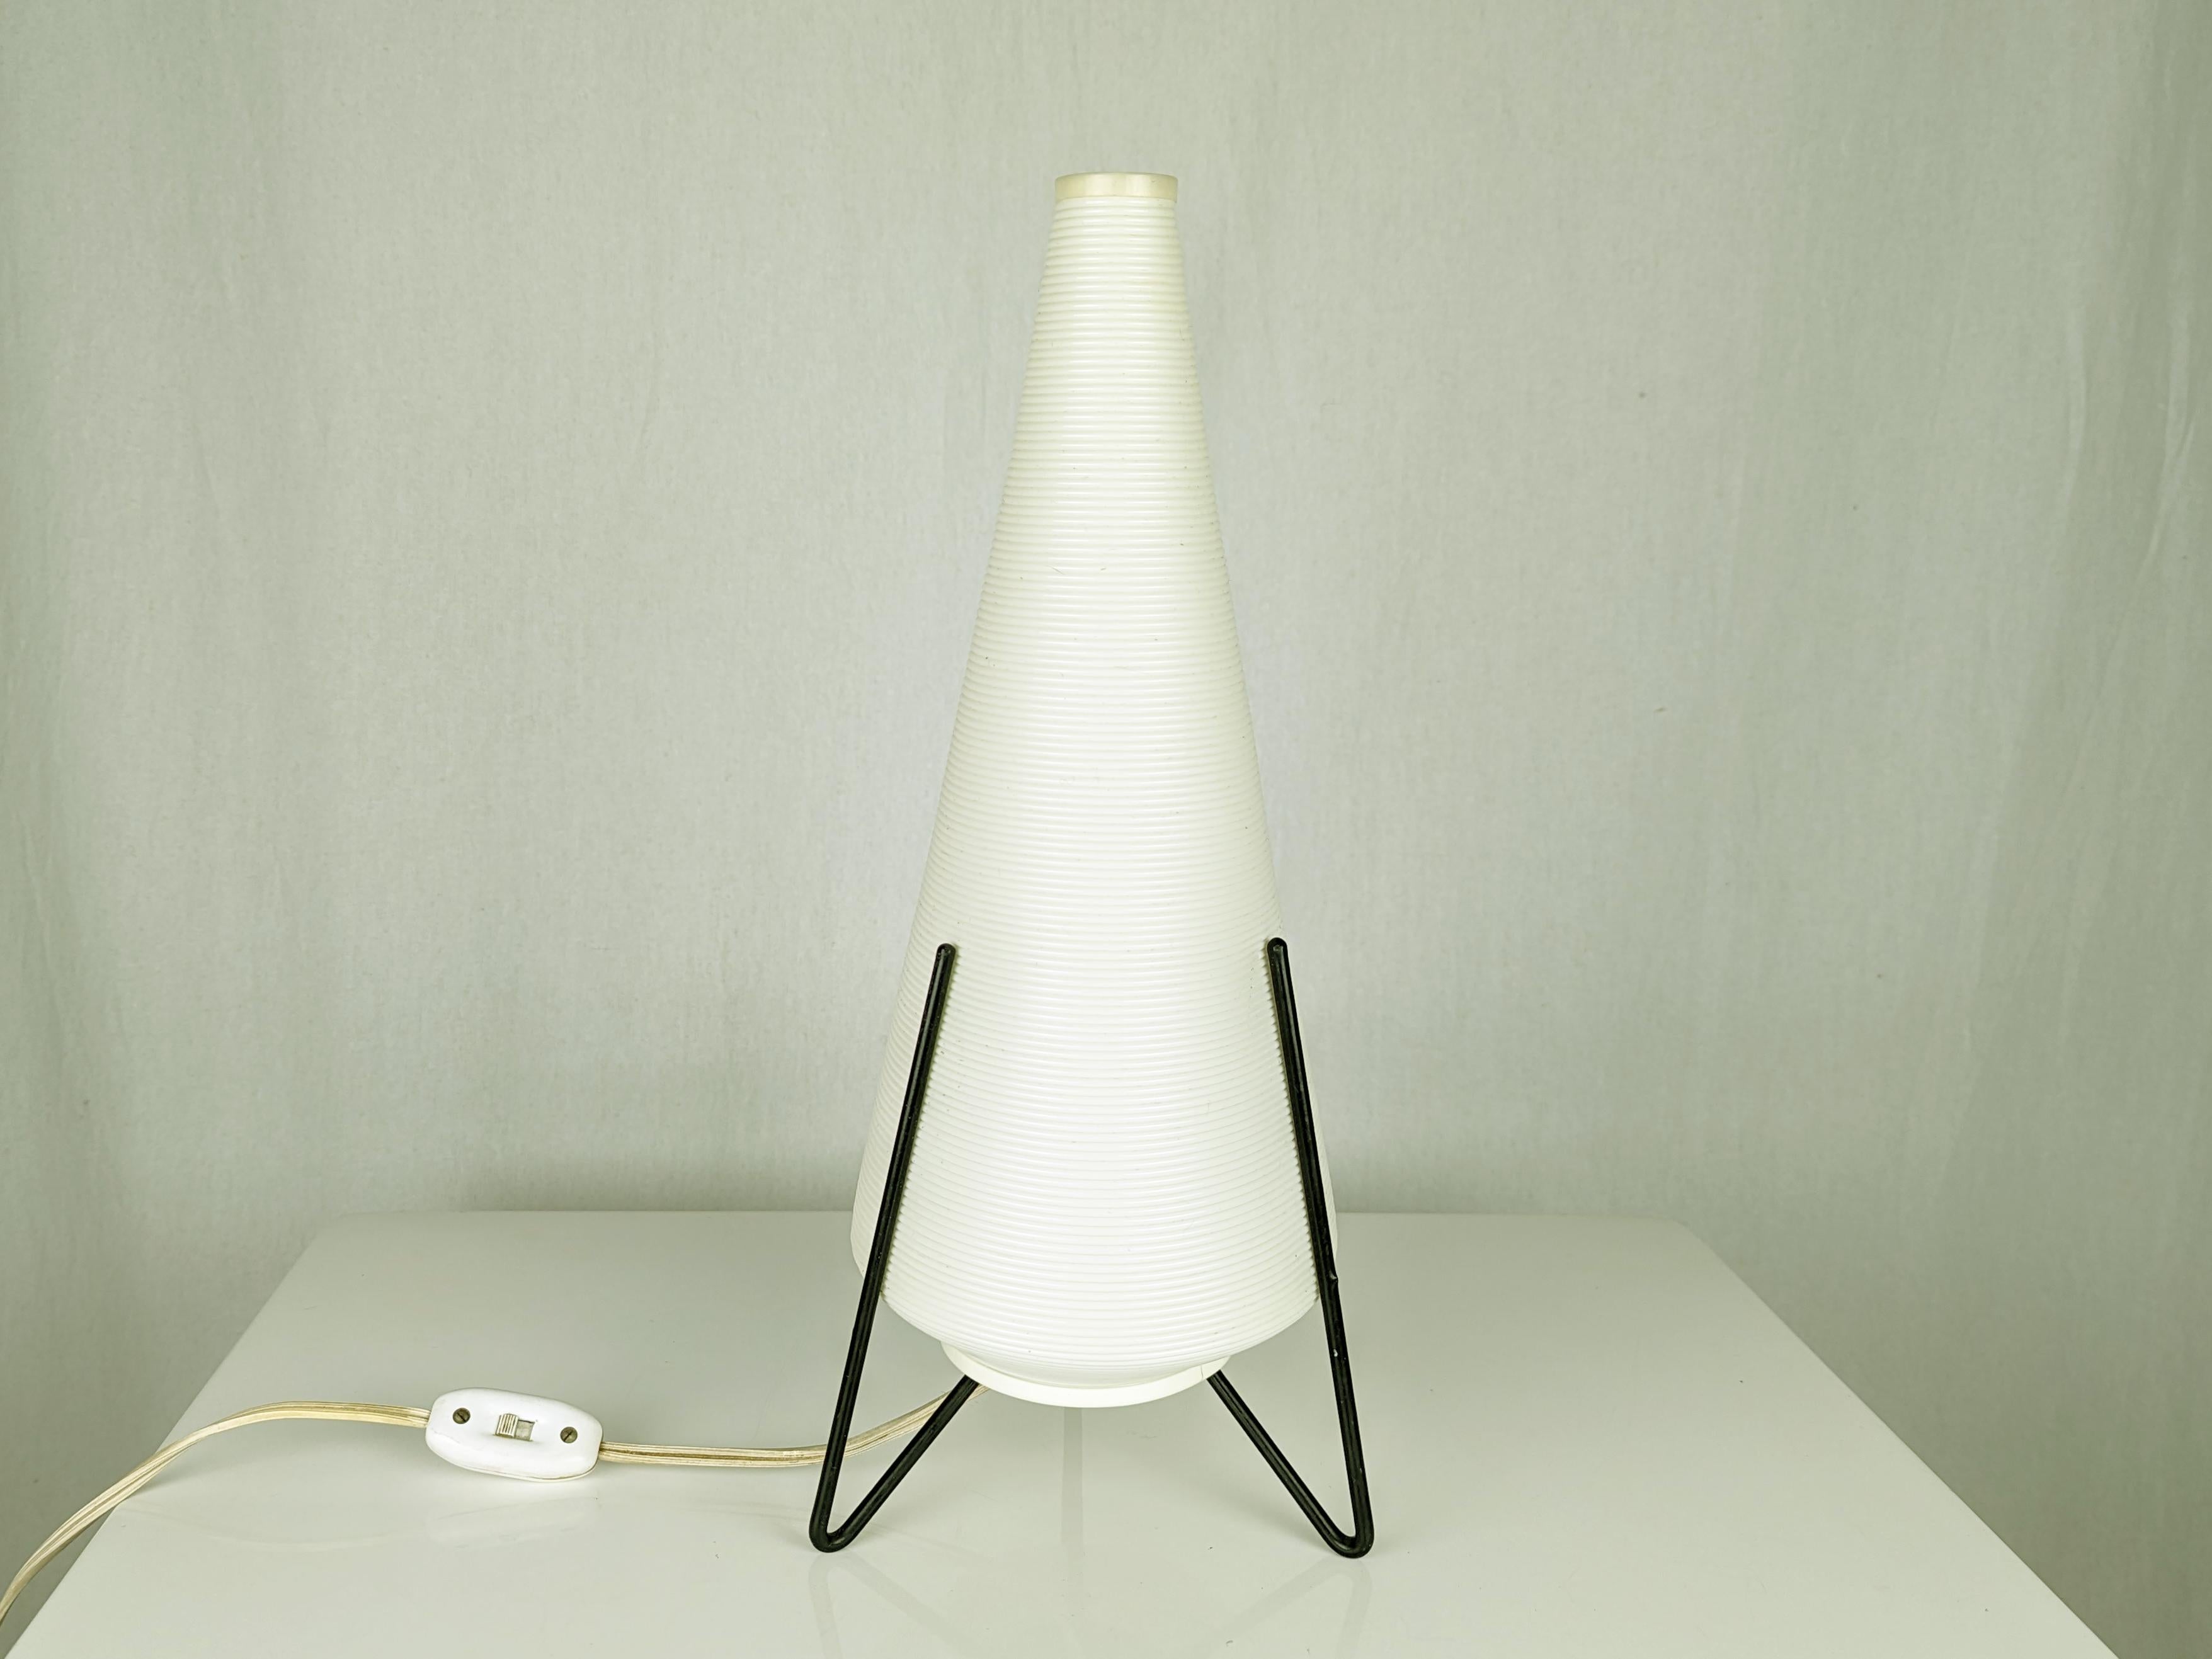 Small table lamp in white/ivory plastic shade and black metal rod structure. Good condition.